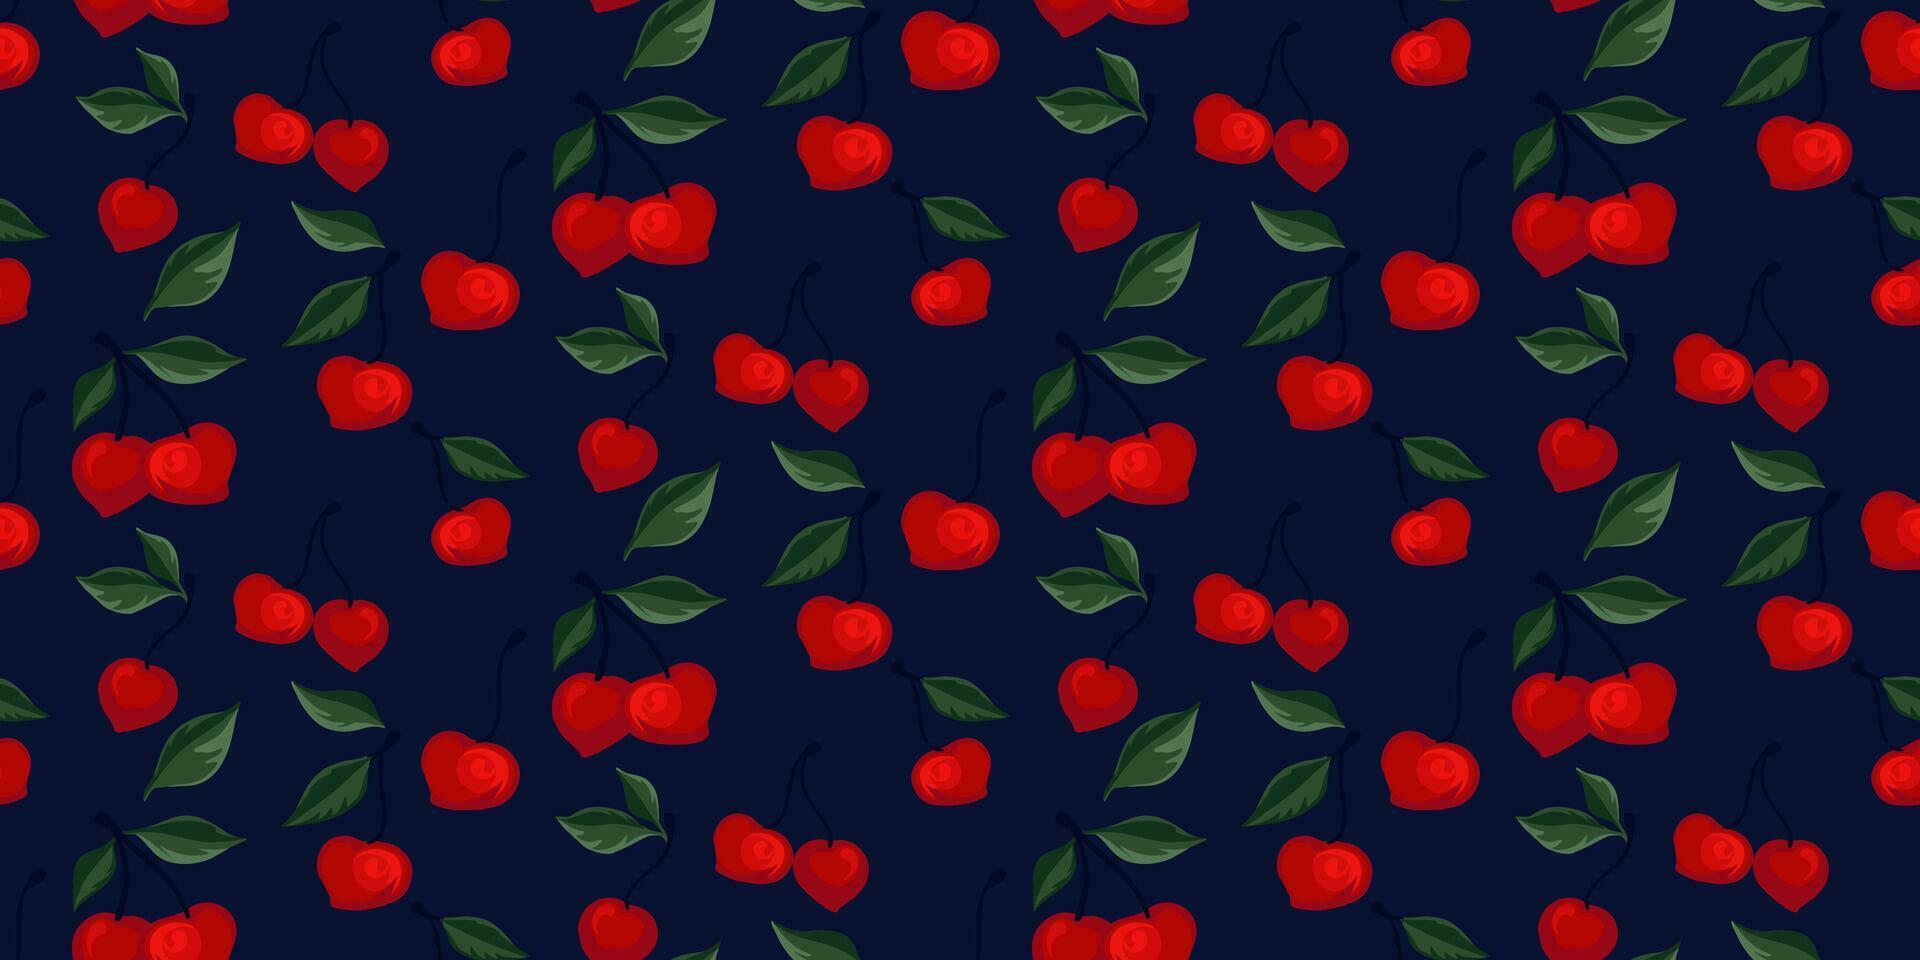 Seamless creative vibrant red cherries pattern on a dark background. Abstract  illustration berries, fruits, leaves print. Vector hand drawn sketch. Design for fabric, fashion, textile, wallpaper